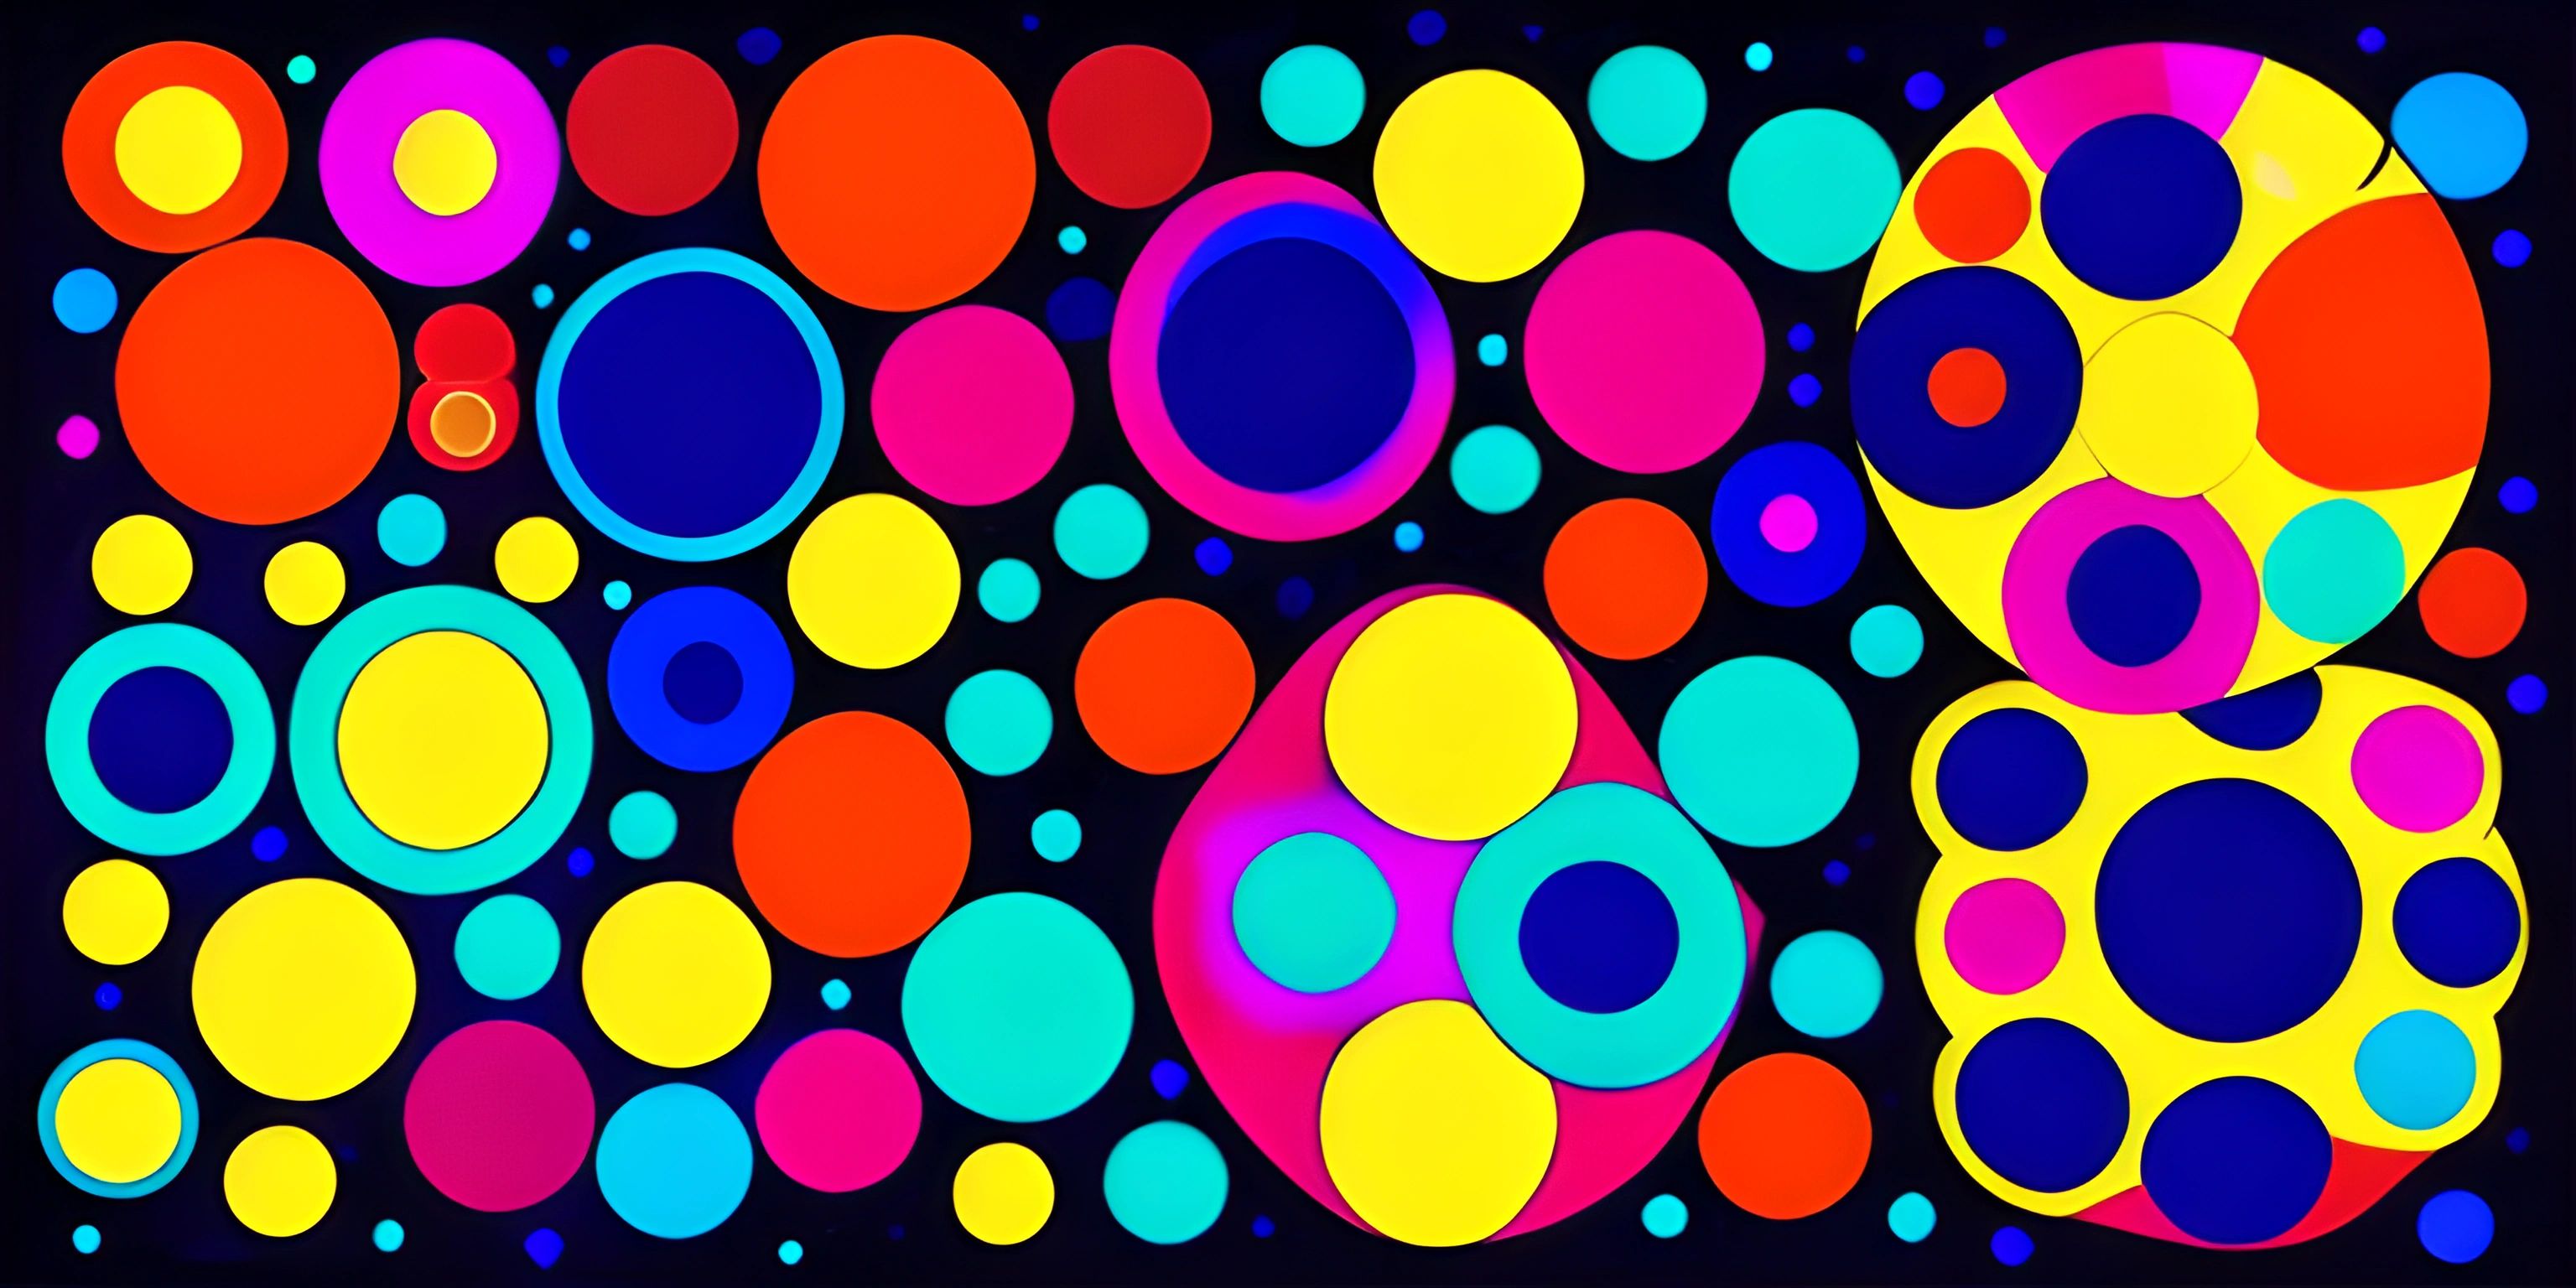 many colored balls and bubbles on a black background and it looks like the shape of circles